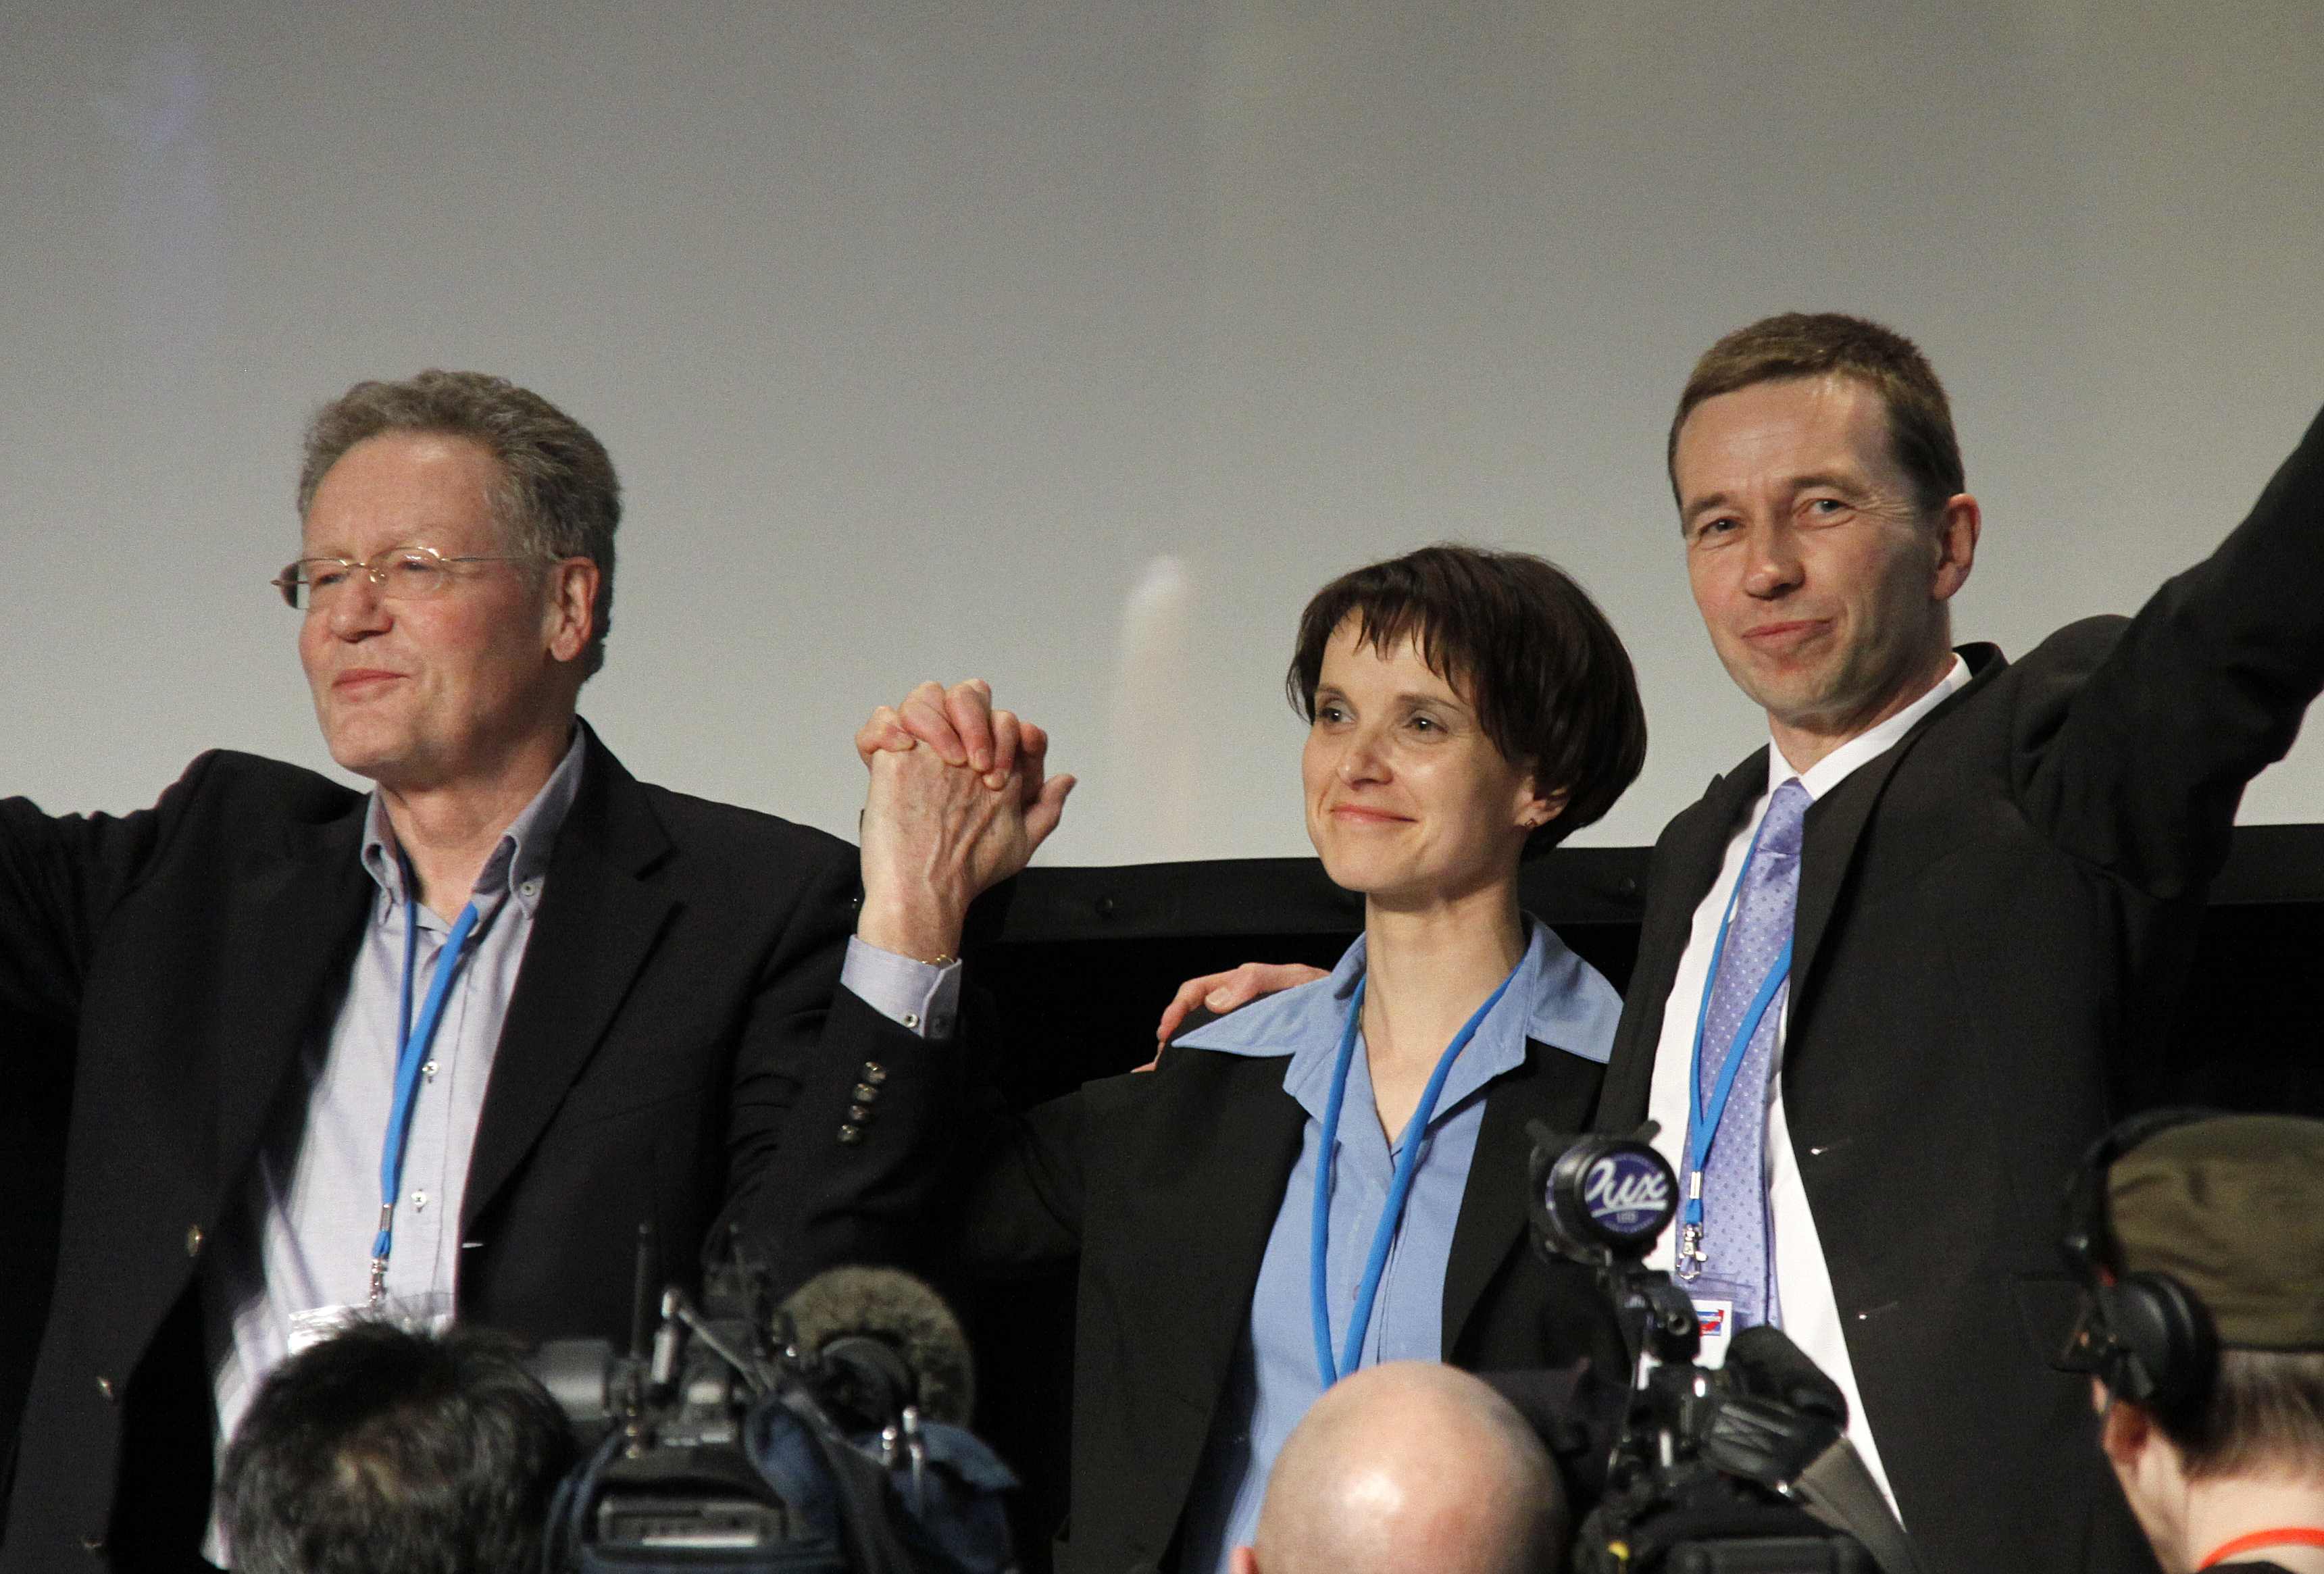 AfD founders Konrad Adam (left), Bernd Lucke with Frauke Petry during the first AfD convention on 14 April 2013 in Berlin. Source: Wikimedia